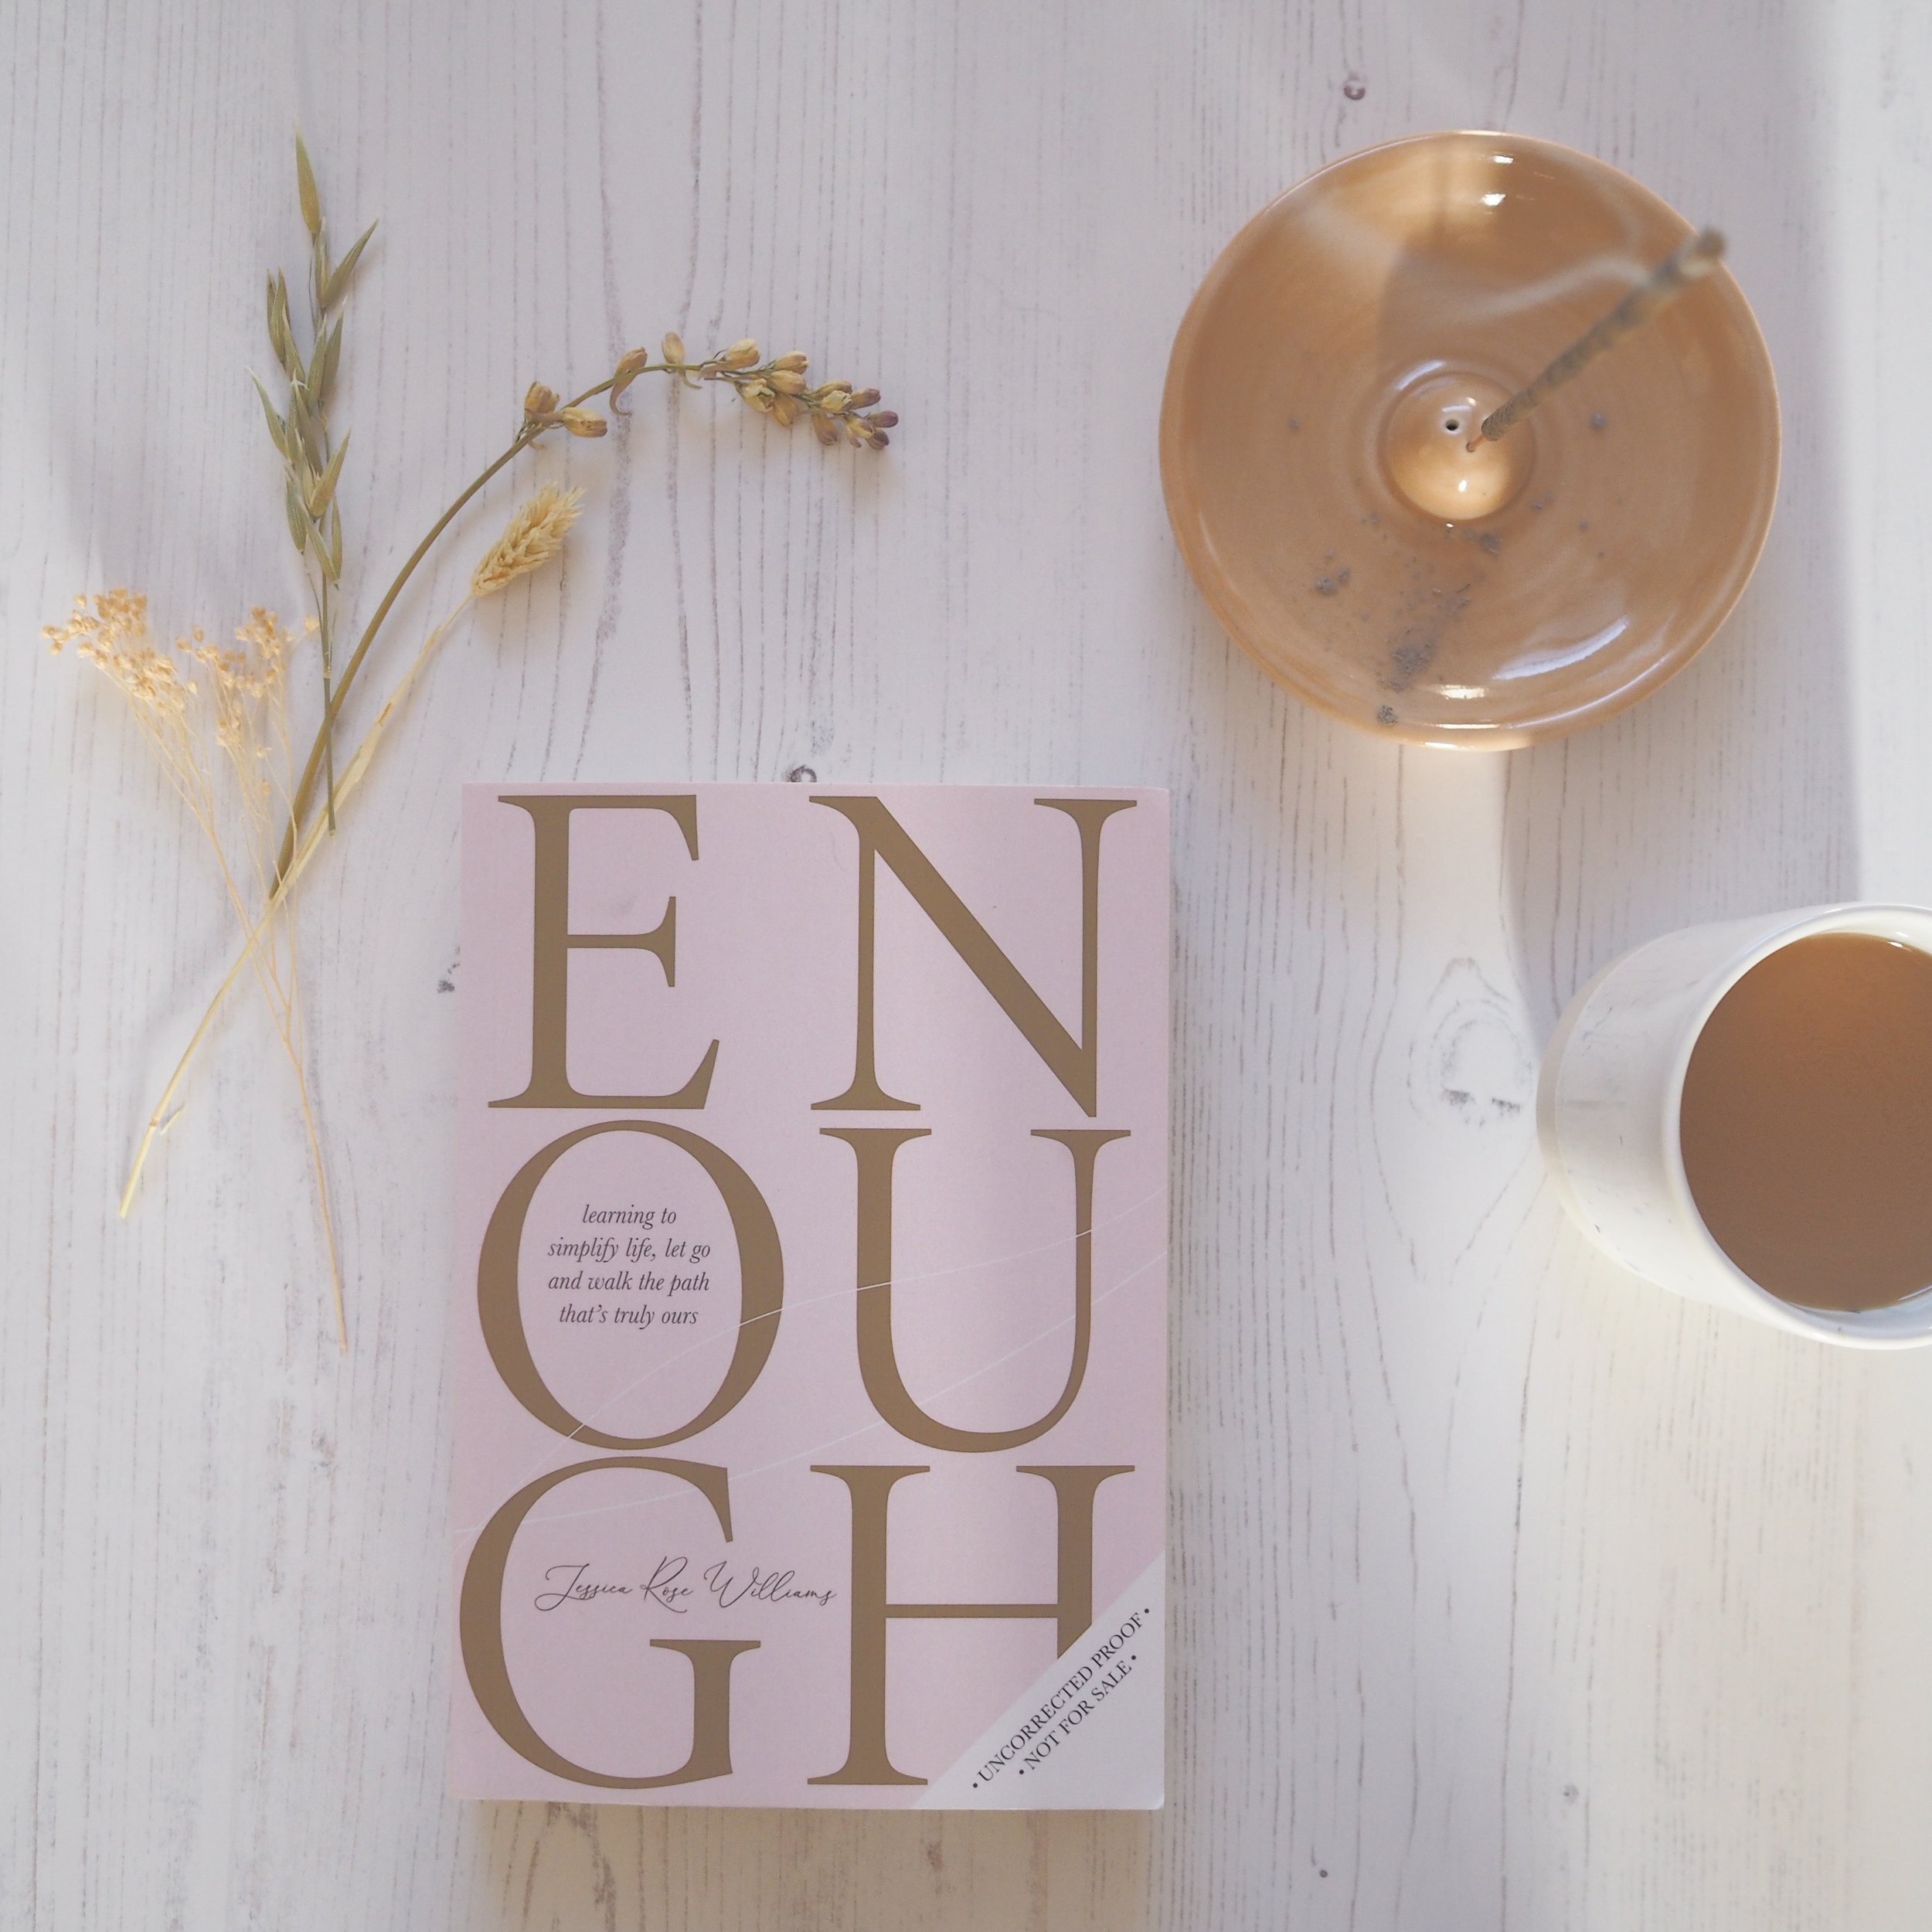 Book called Enough on white surface, with dried flowers, incense and cup of tea.